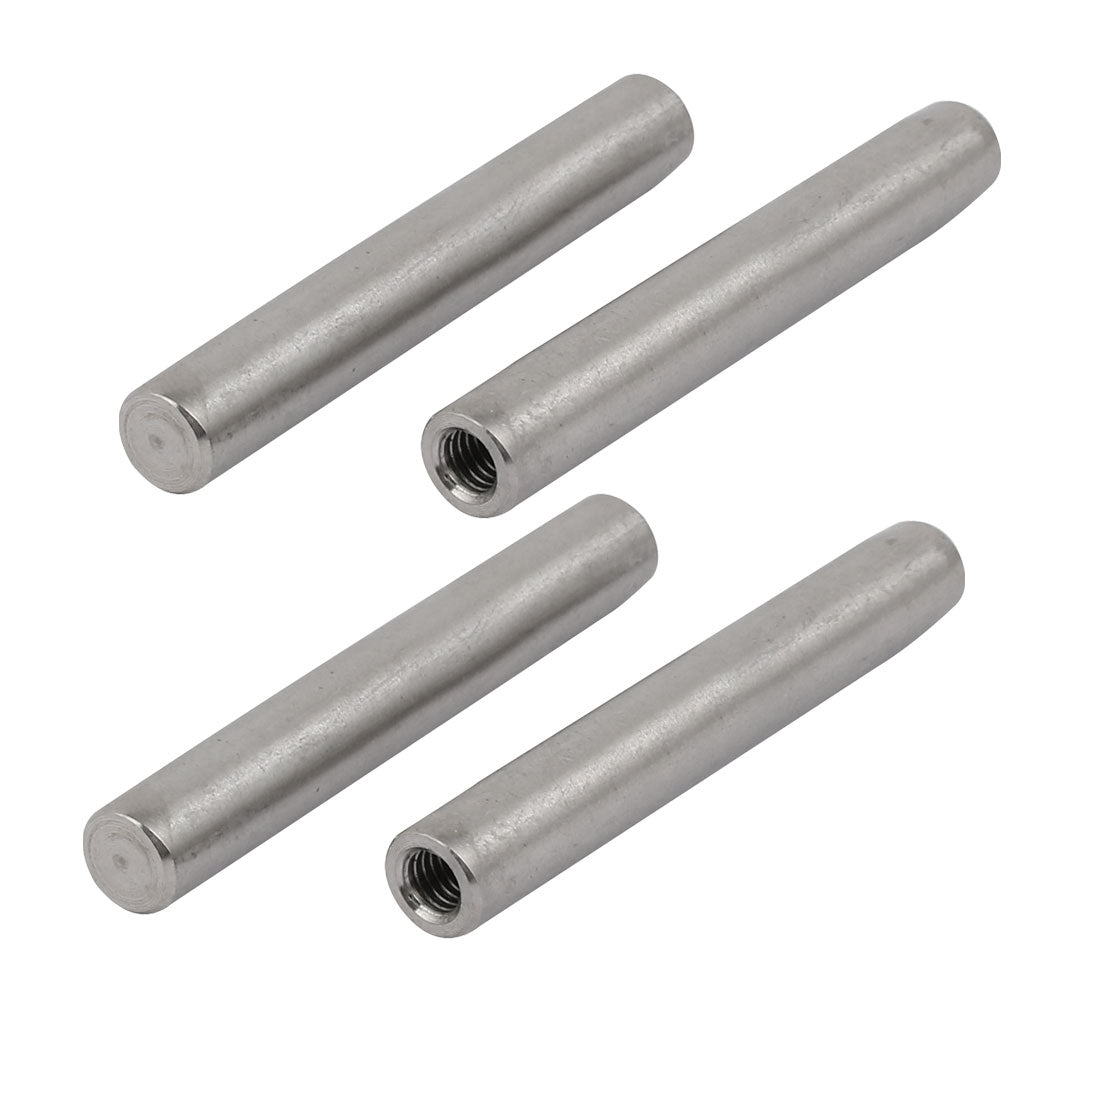 uxcell Uxcell 304 Stainless Steel M6 Female Thread 10mm x 70mm Cylindrical Dowel Pin 4pcs